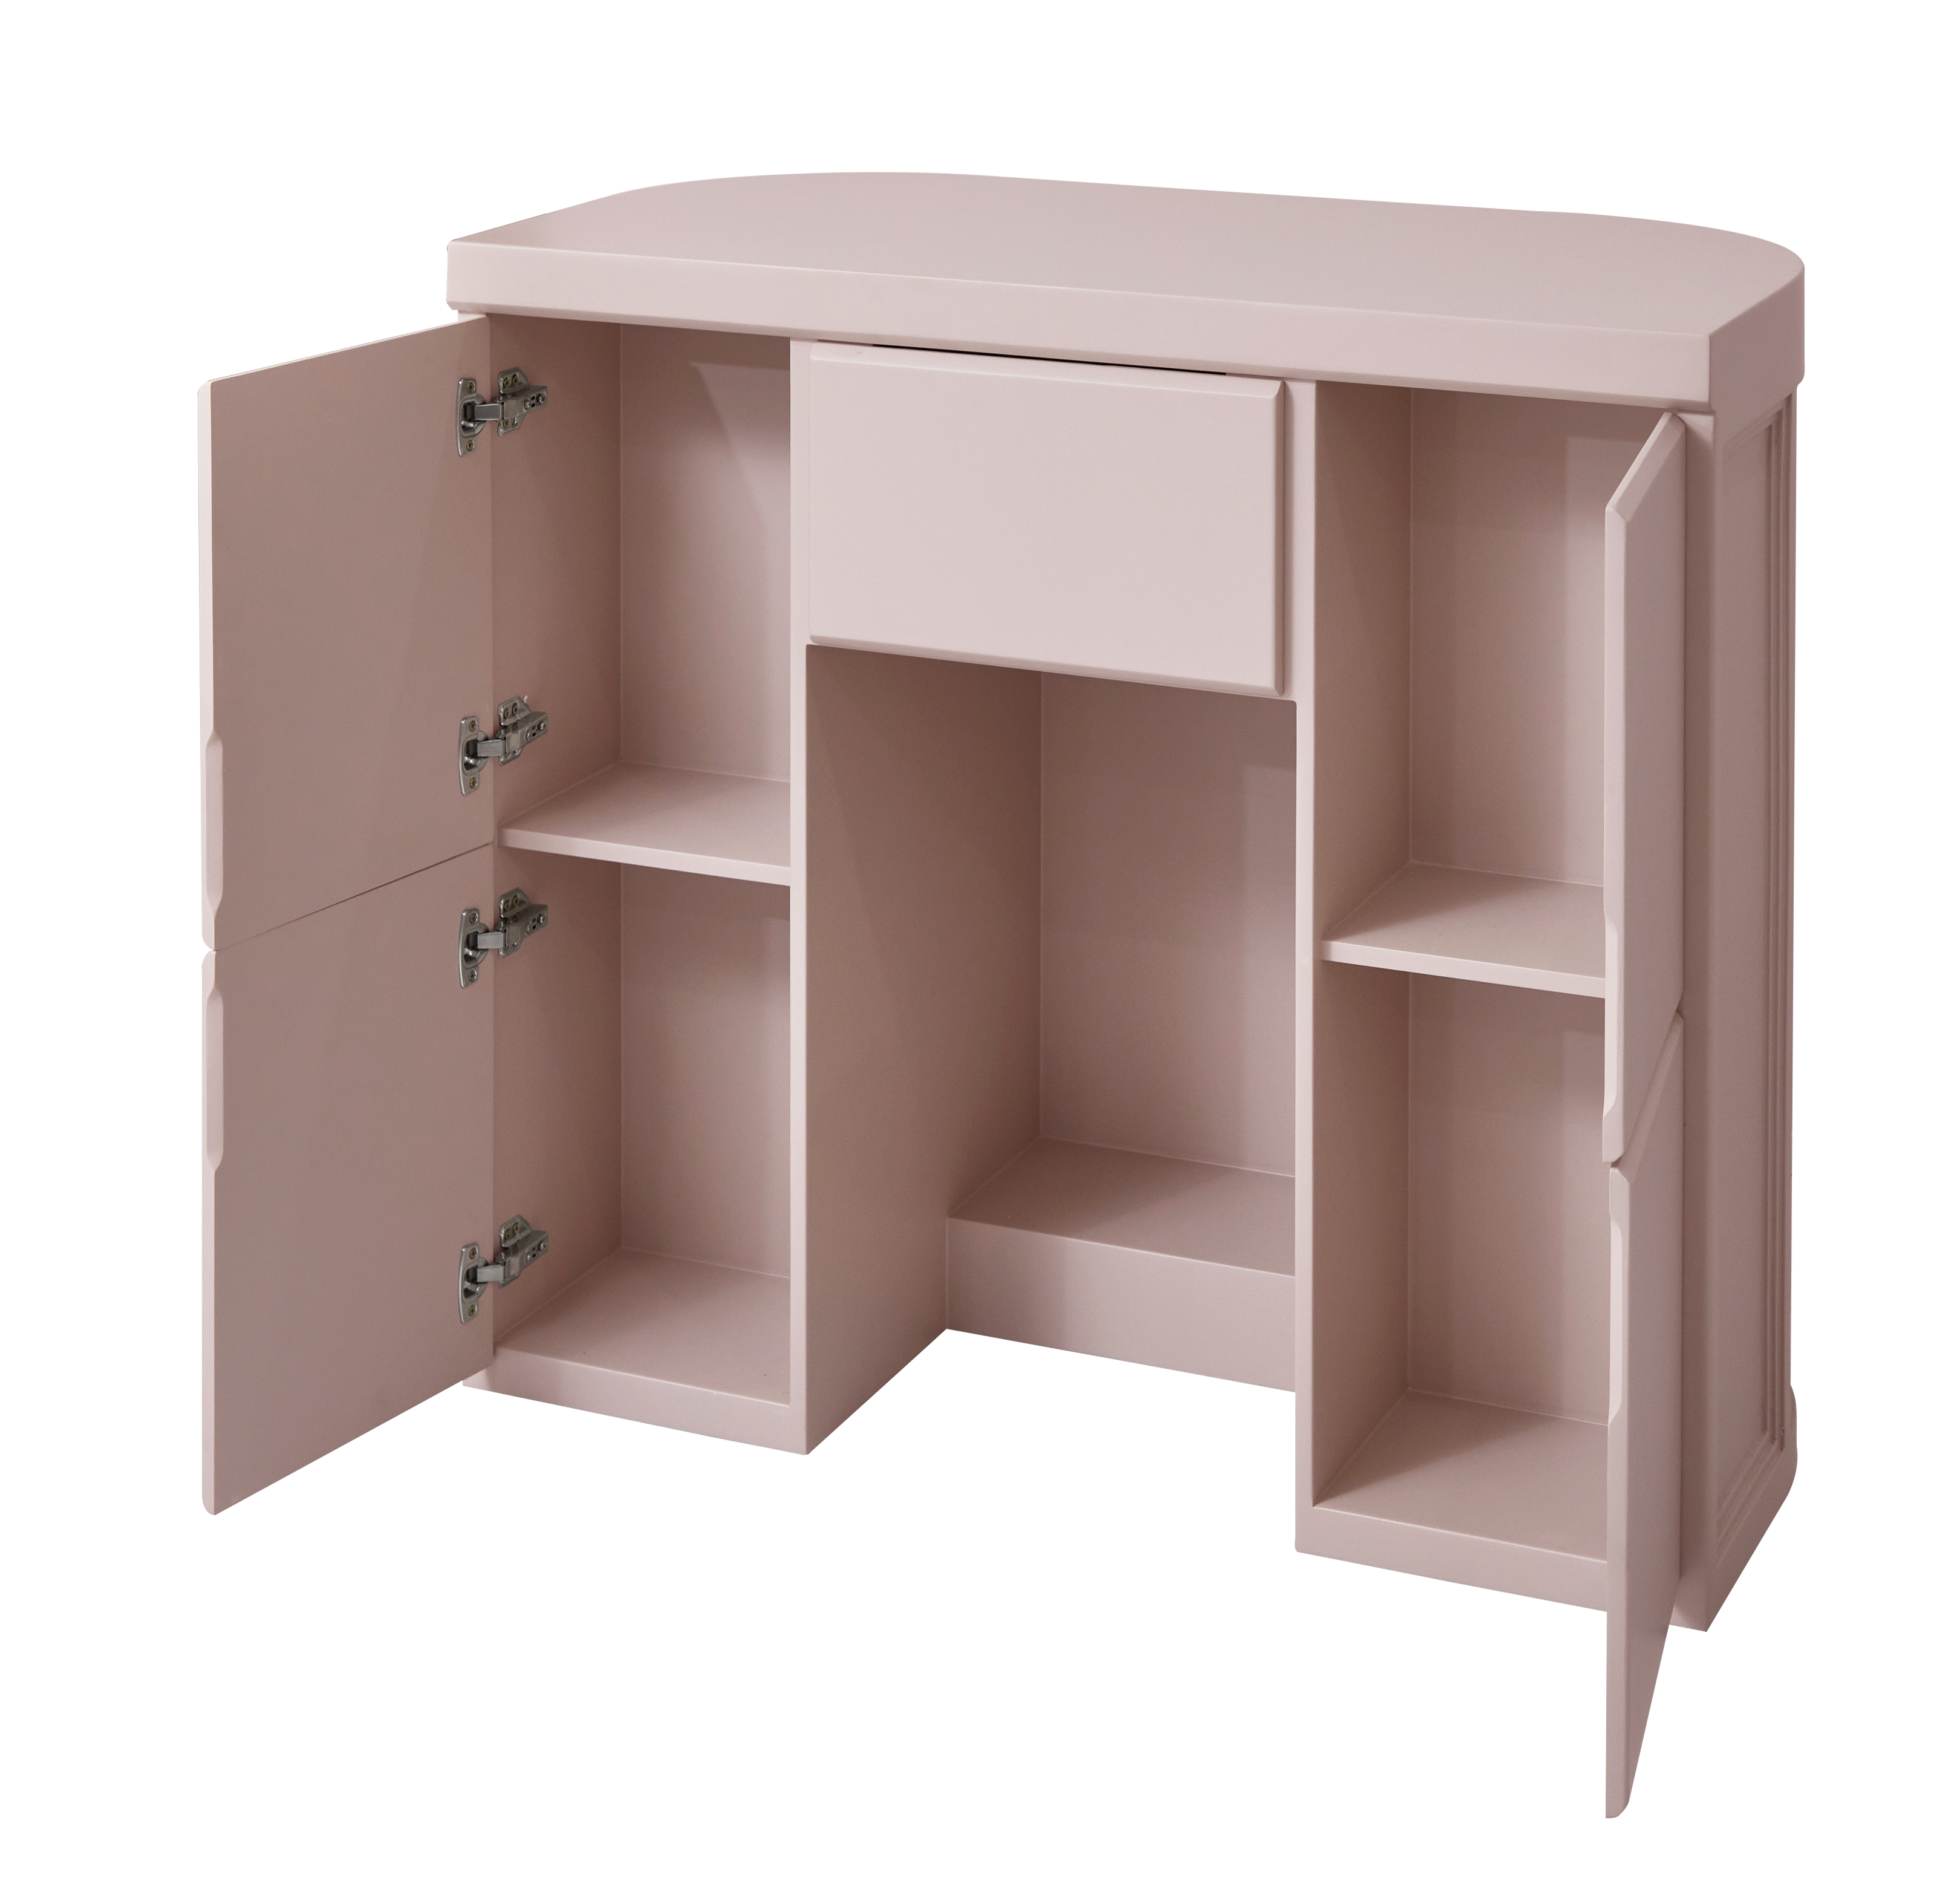 The Monroe Desk - Pink by SEC